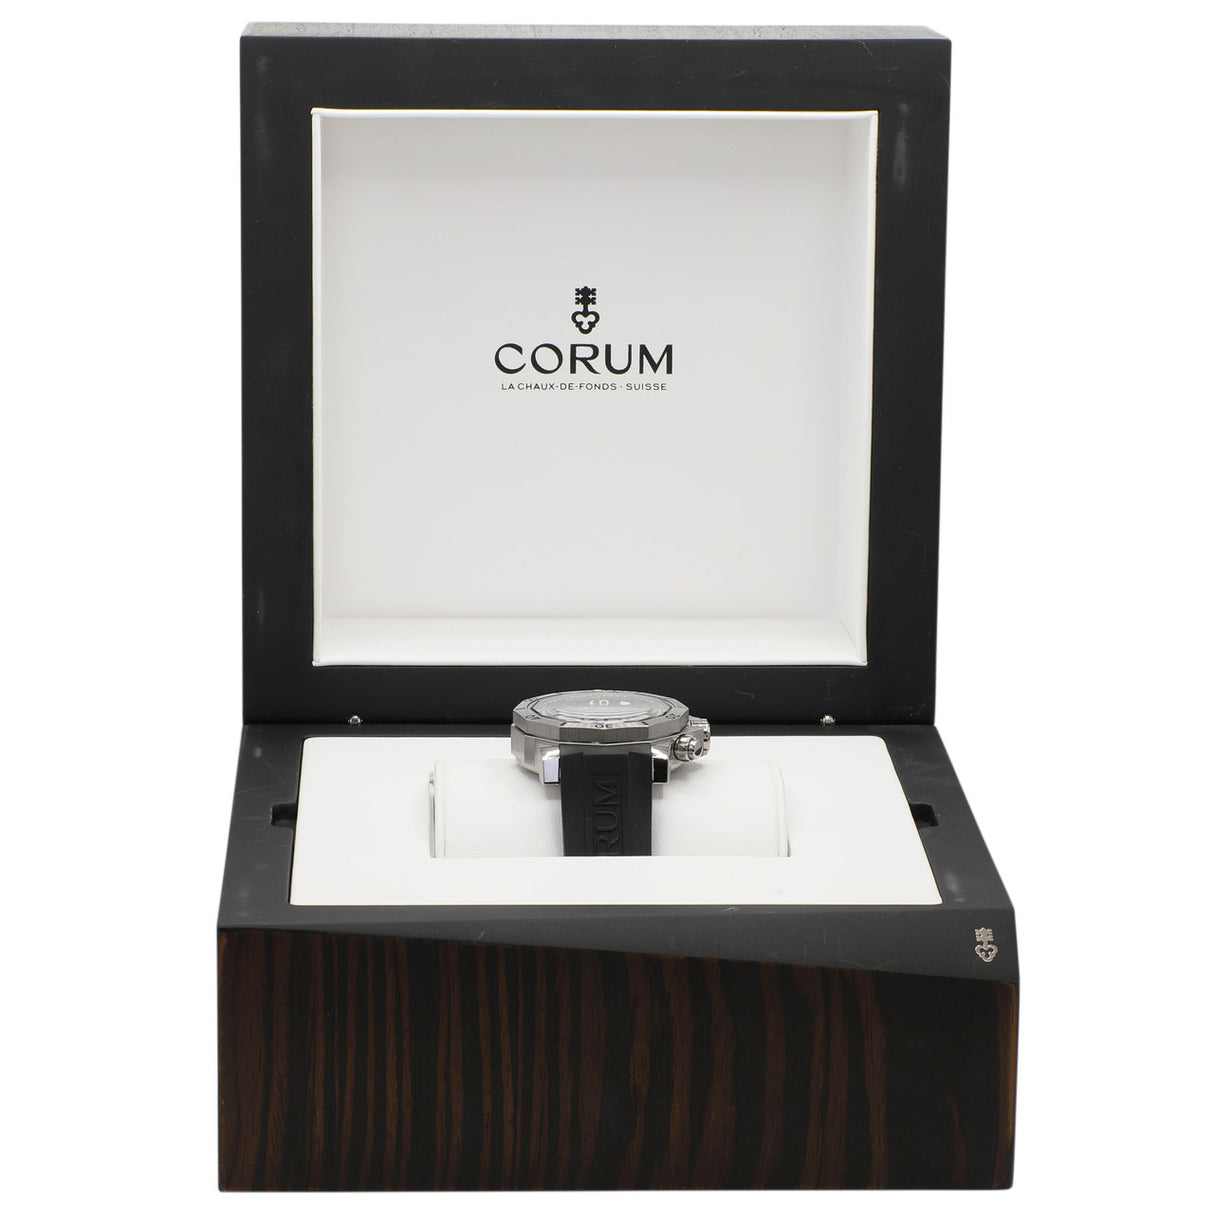 Corum Stainless Steel Admiral's Cup Seafender Chronograph A753/02943